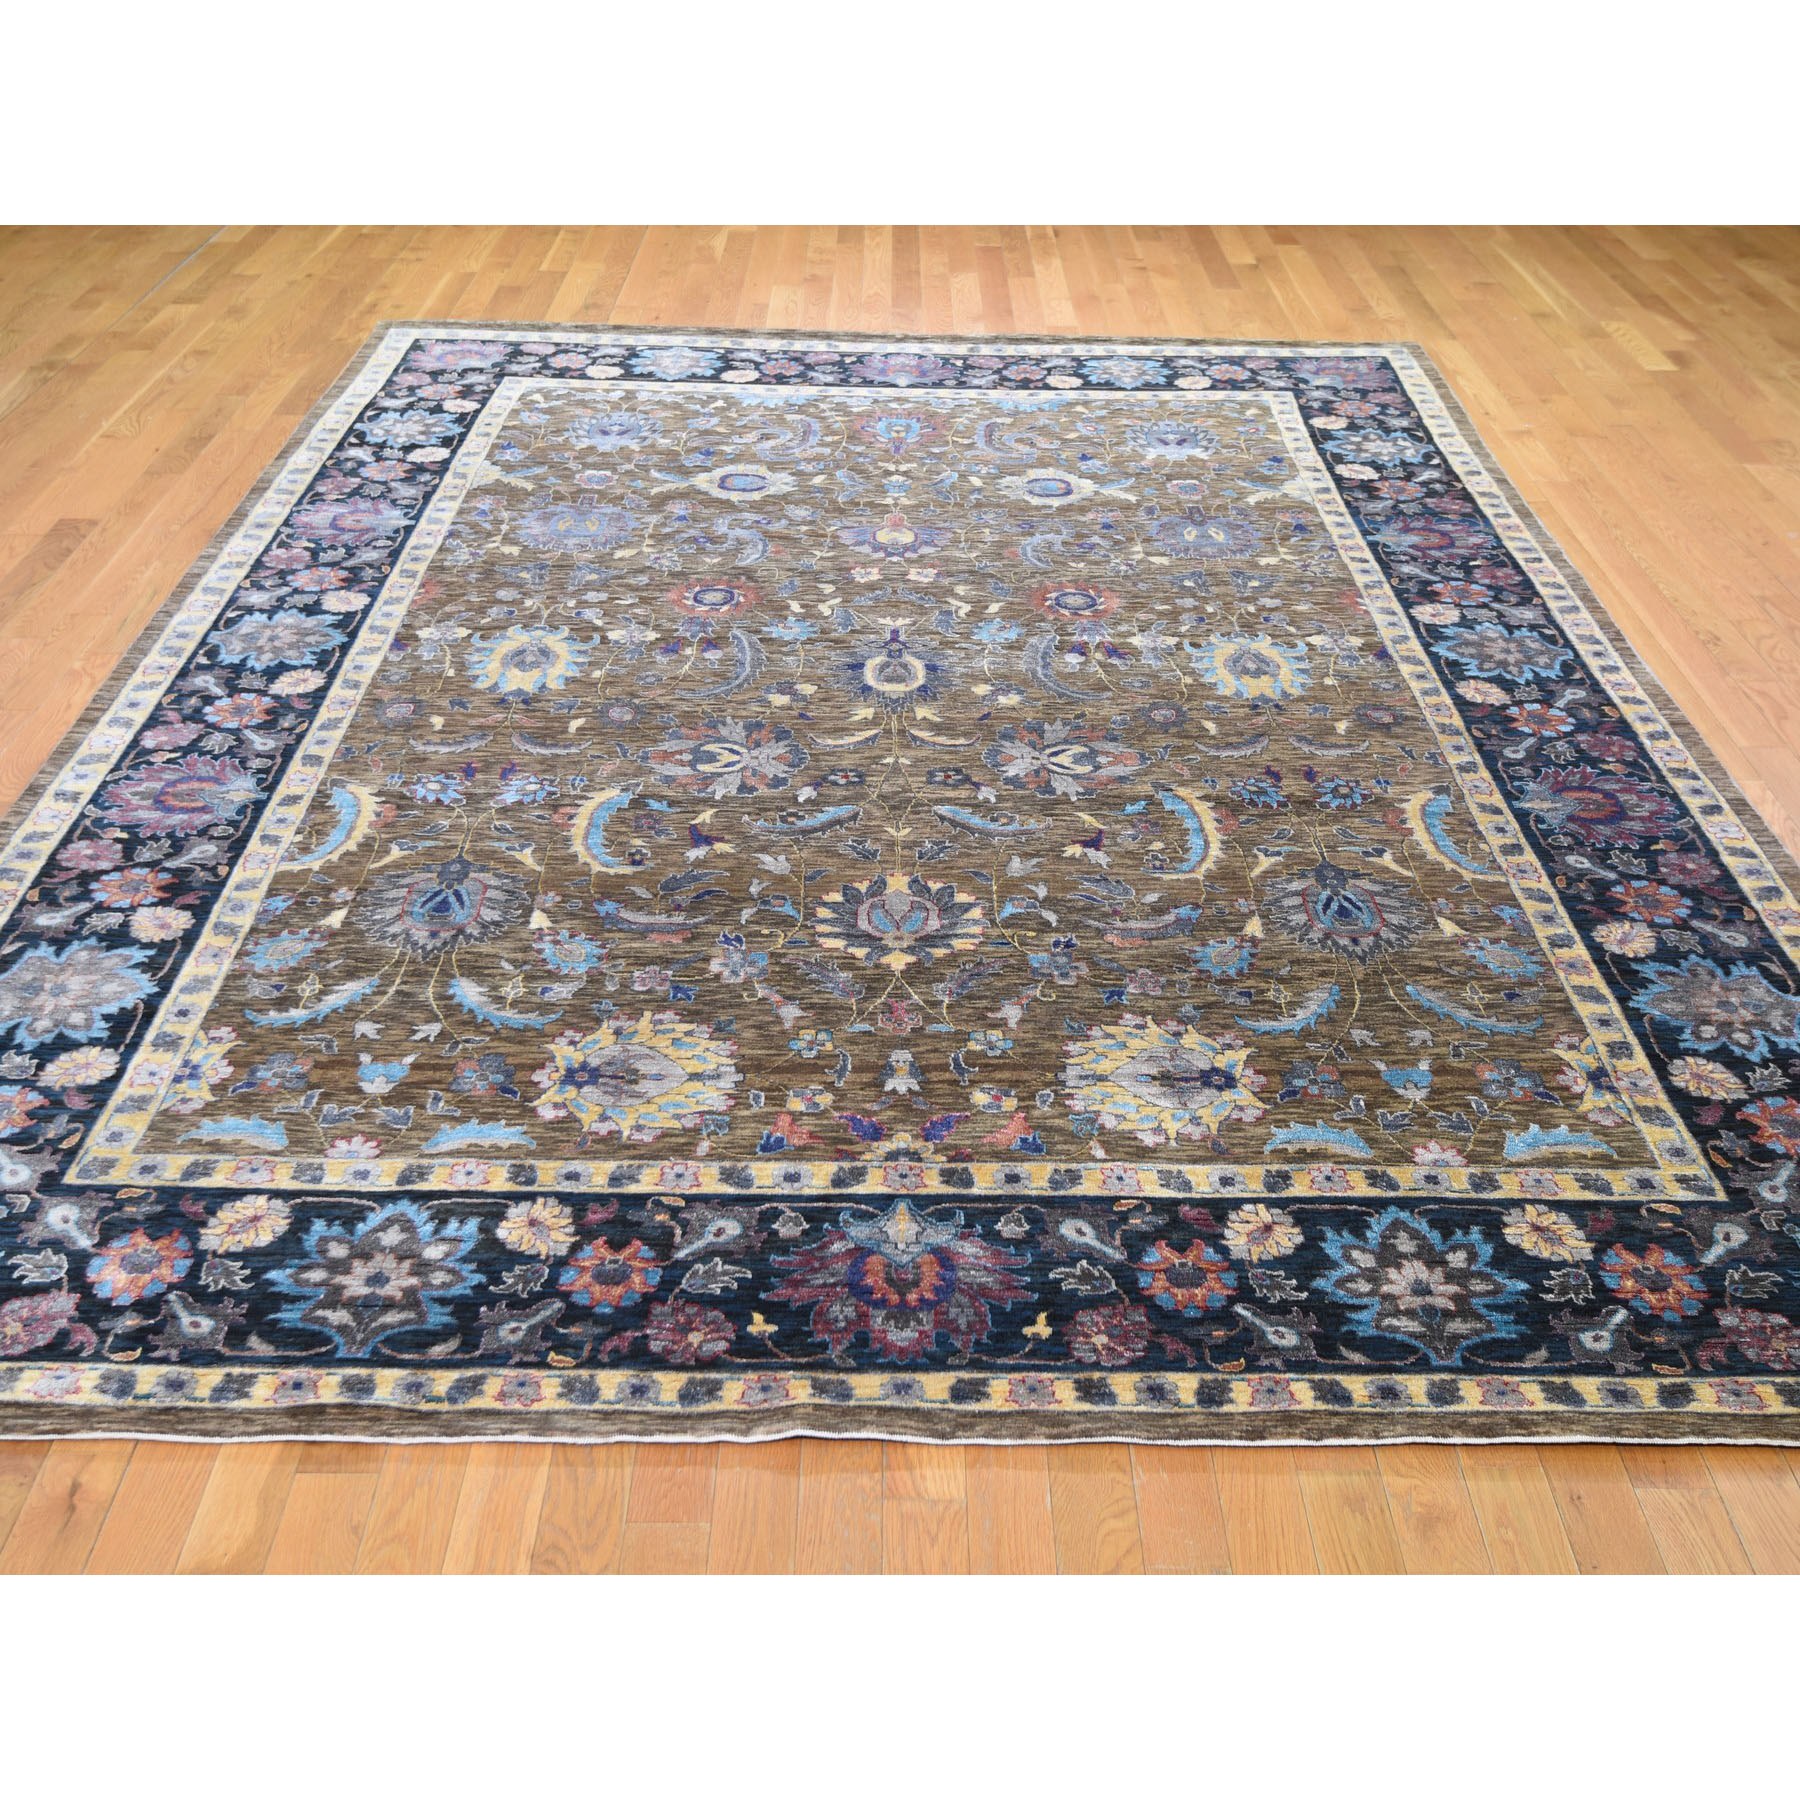 8-10 x12- Brown Silk With Textured Wool Persian Design Hand Knotted Oriental Rug 